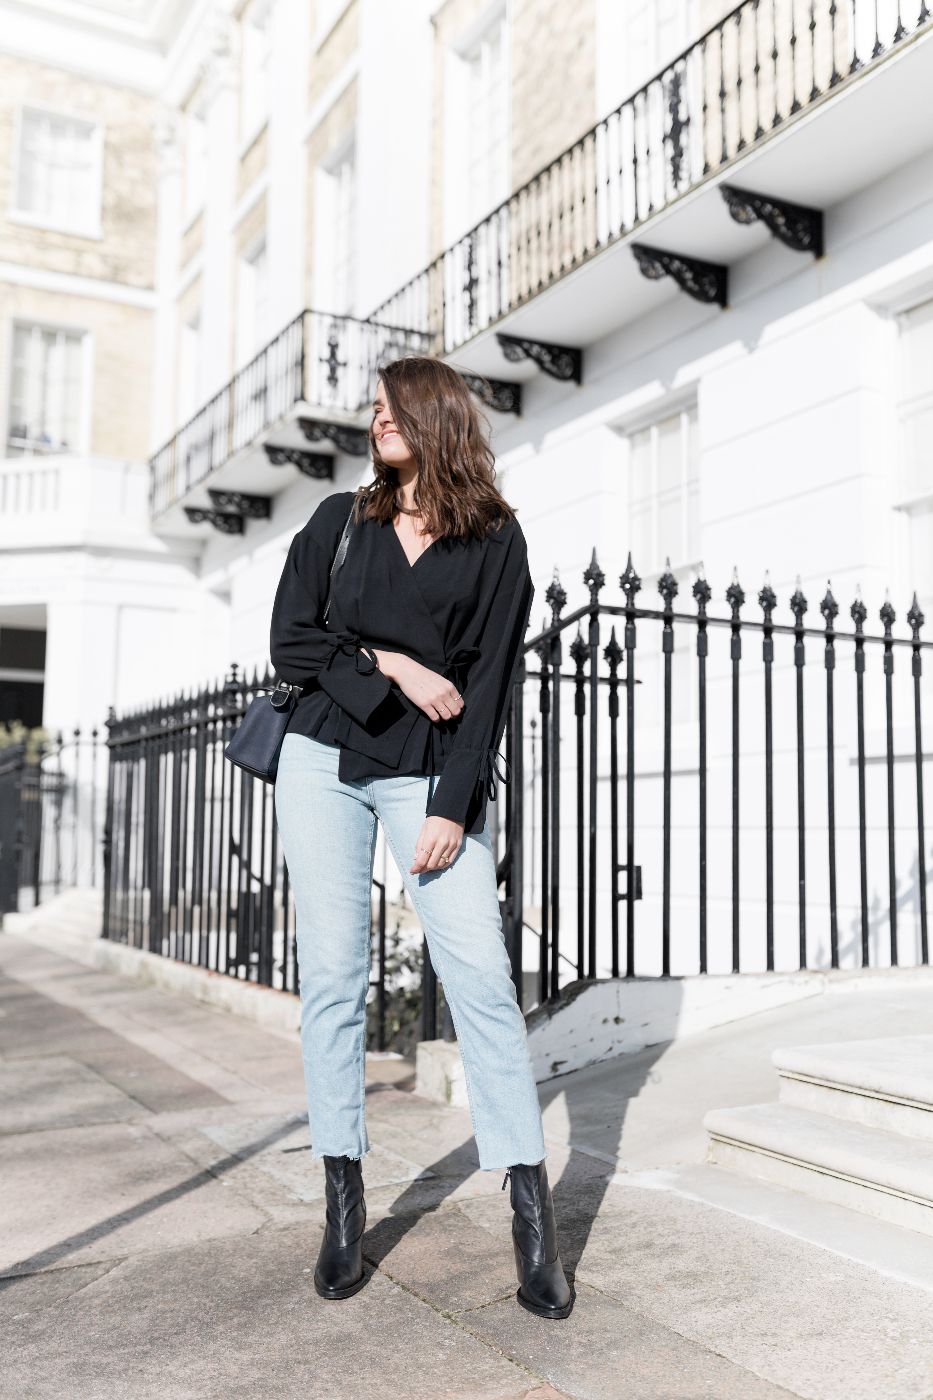 Three New Denim Styles From Topshop & How I Wear Them | AD – The Anna Edit